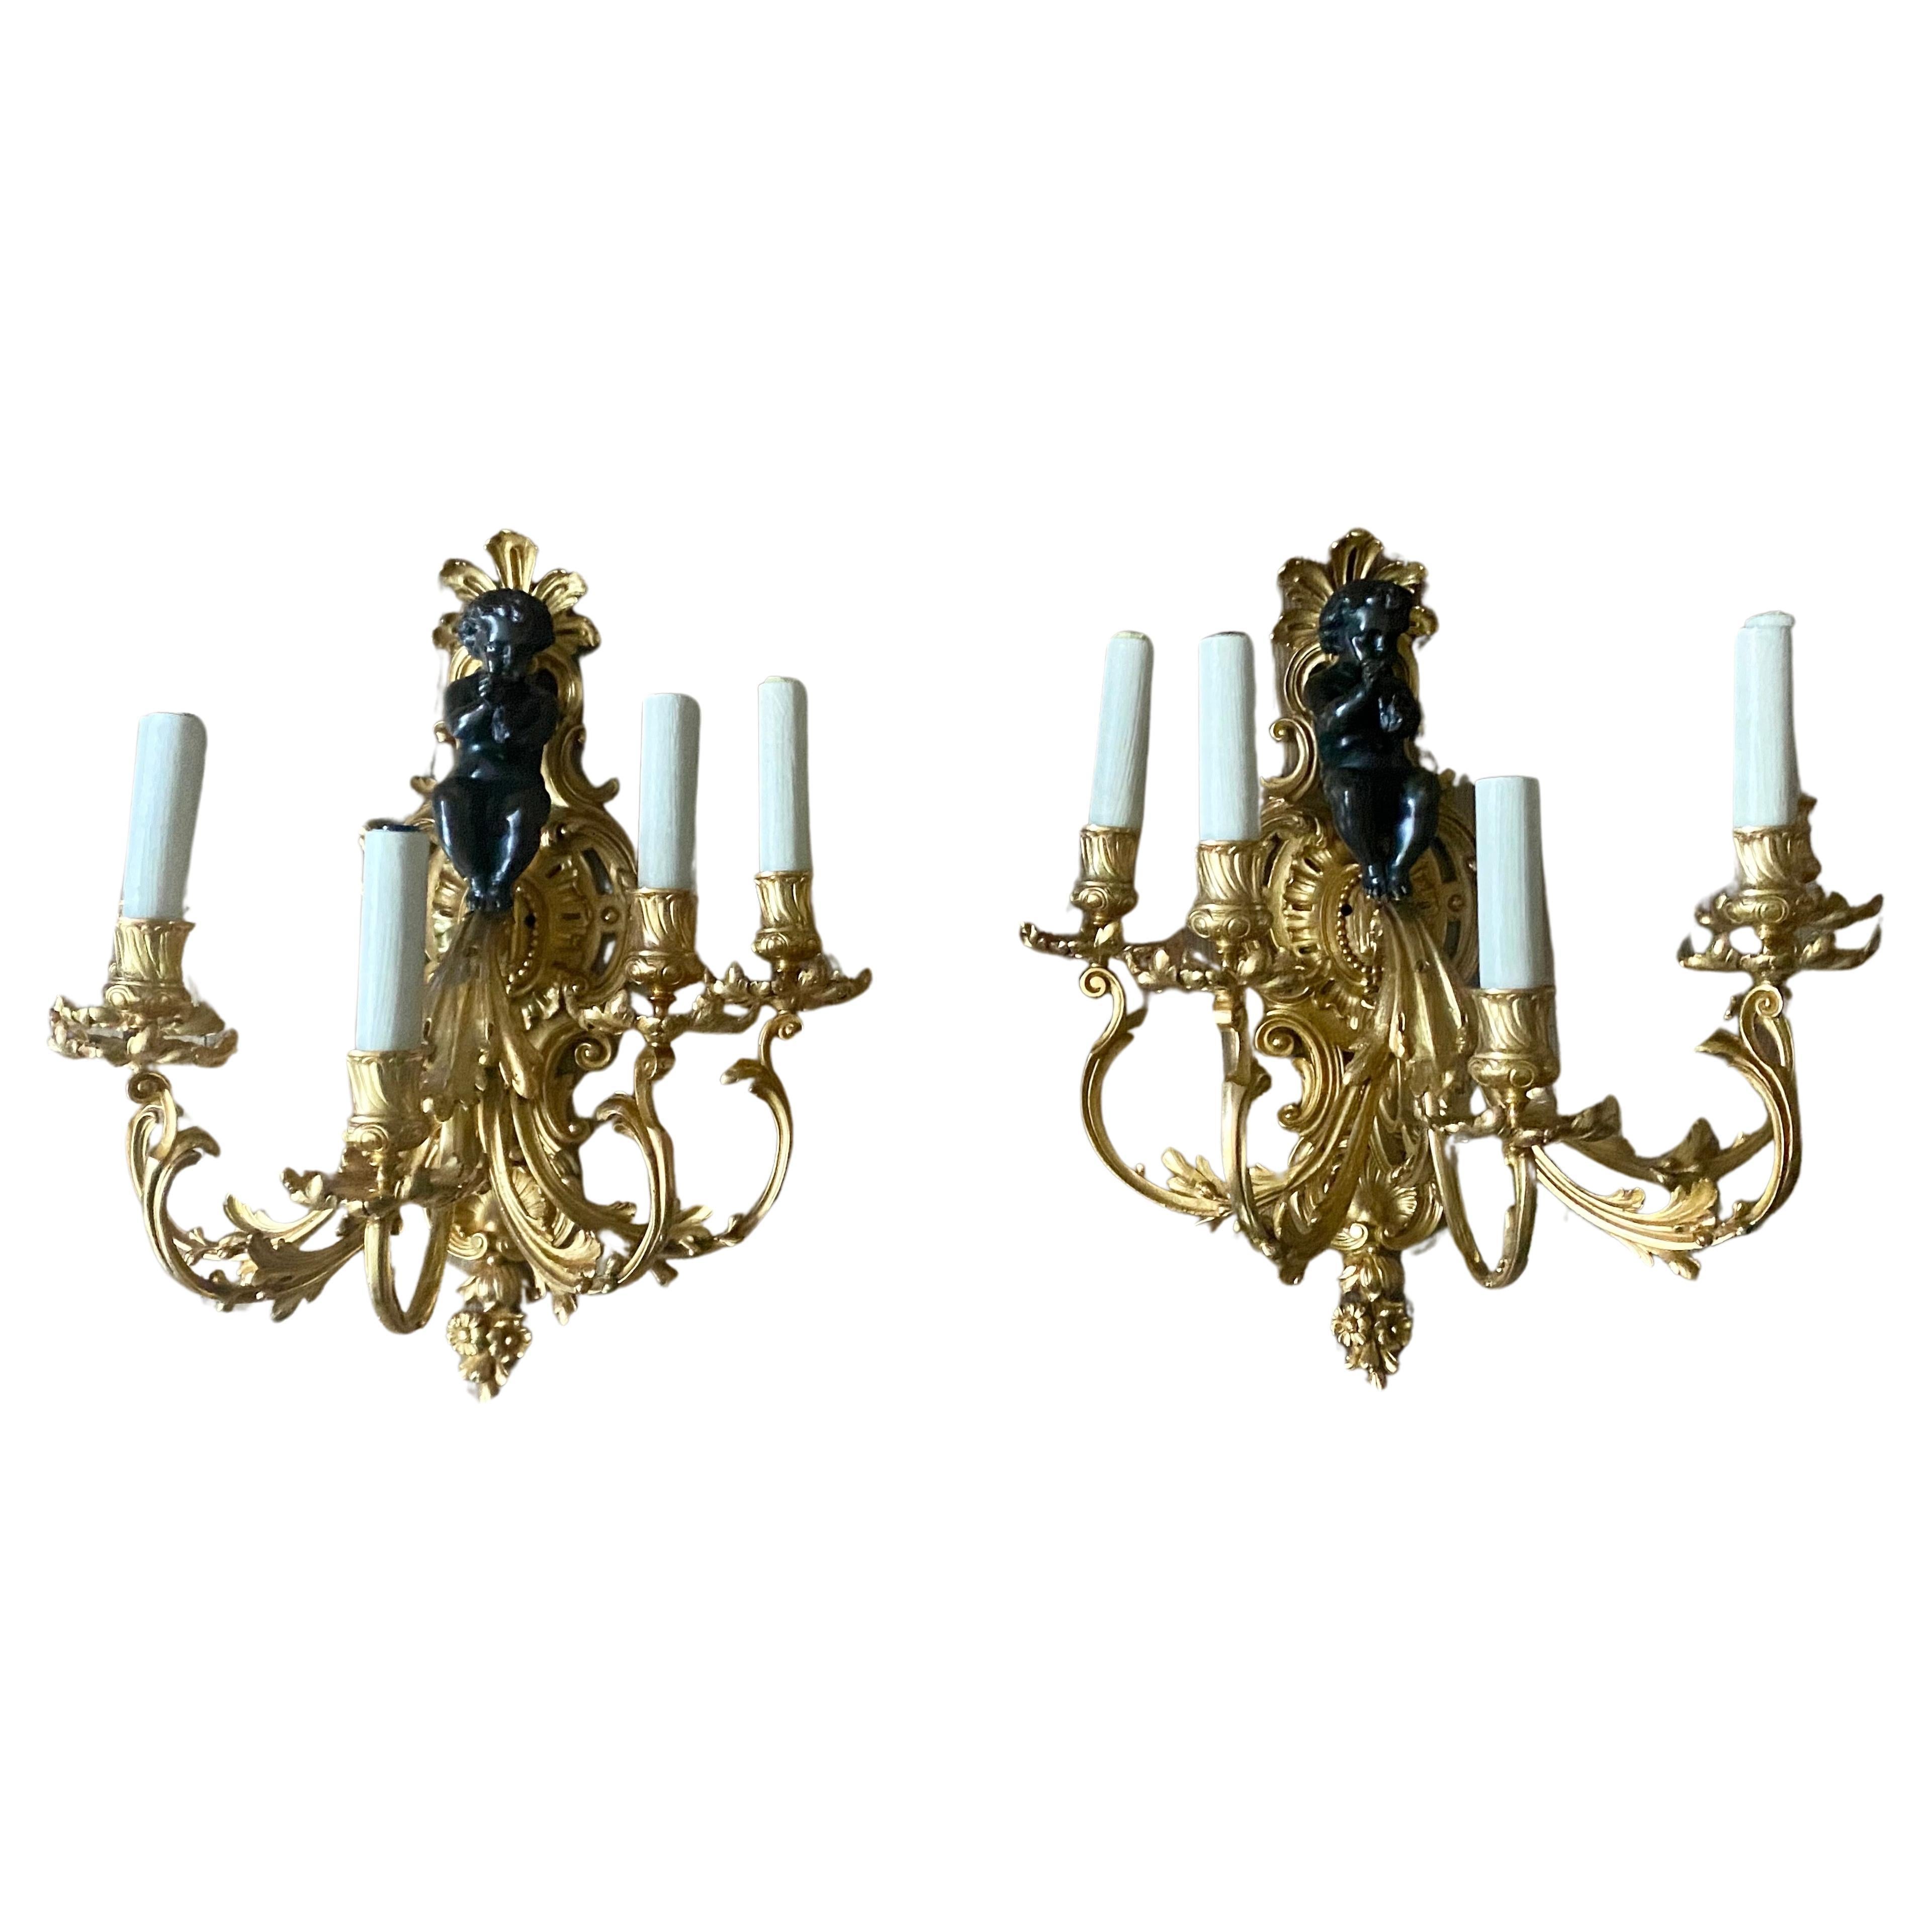 A Large Pair of 19th Century French Gilt Bronze Dore Cherub Wall Sconces For Sale 11